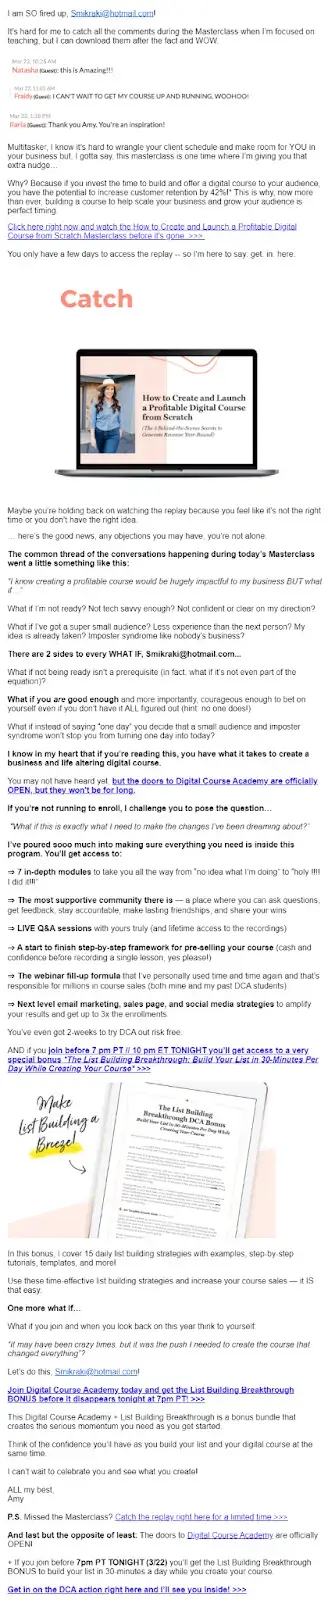 A screenshot showing Amy Porterfield's first post-masterclass email.